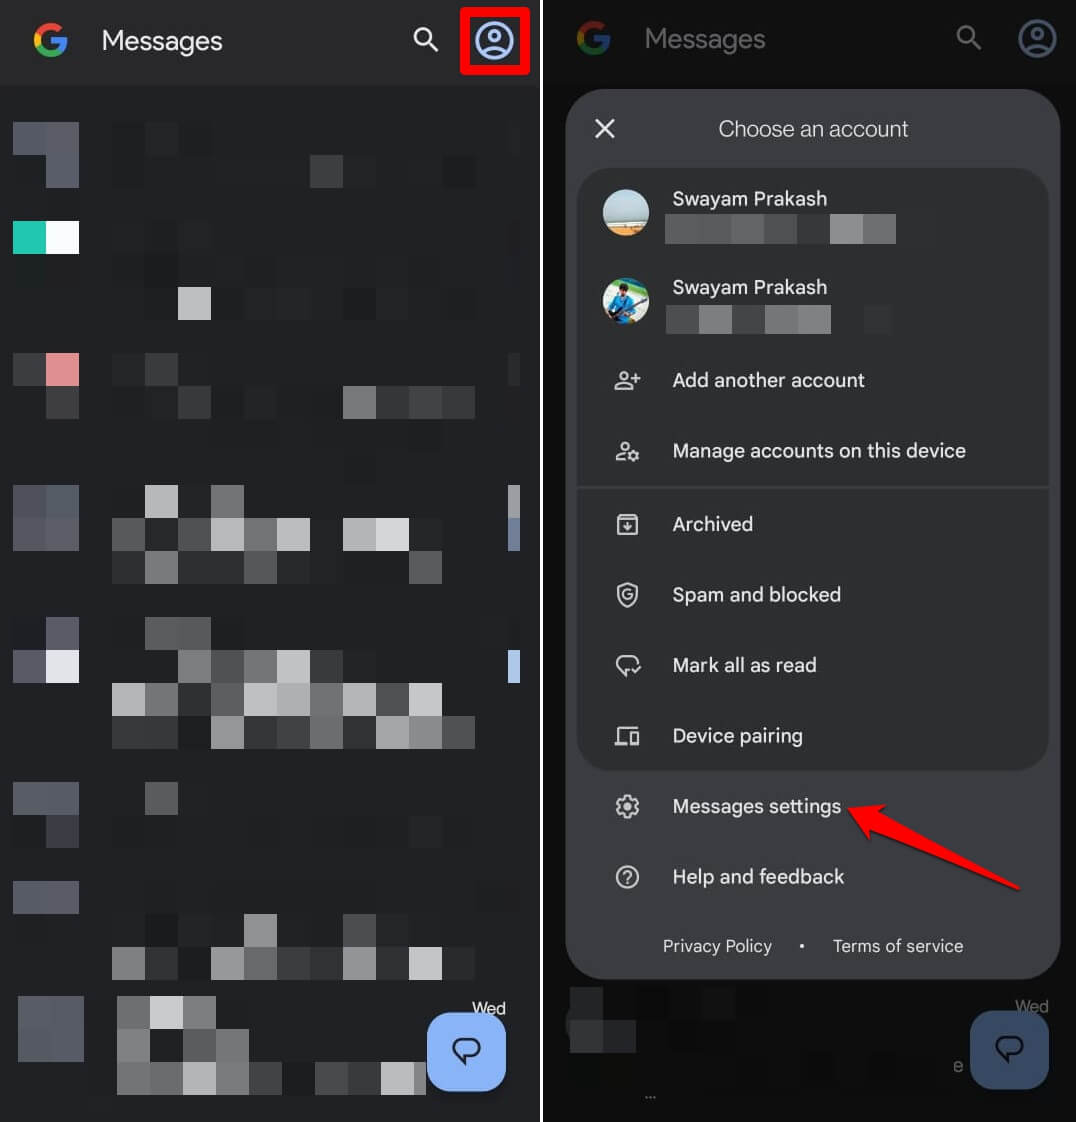 messages-app-settings-on-Android-OS